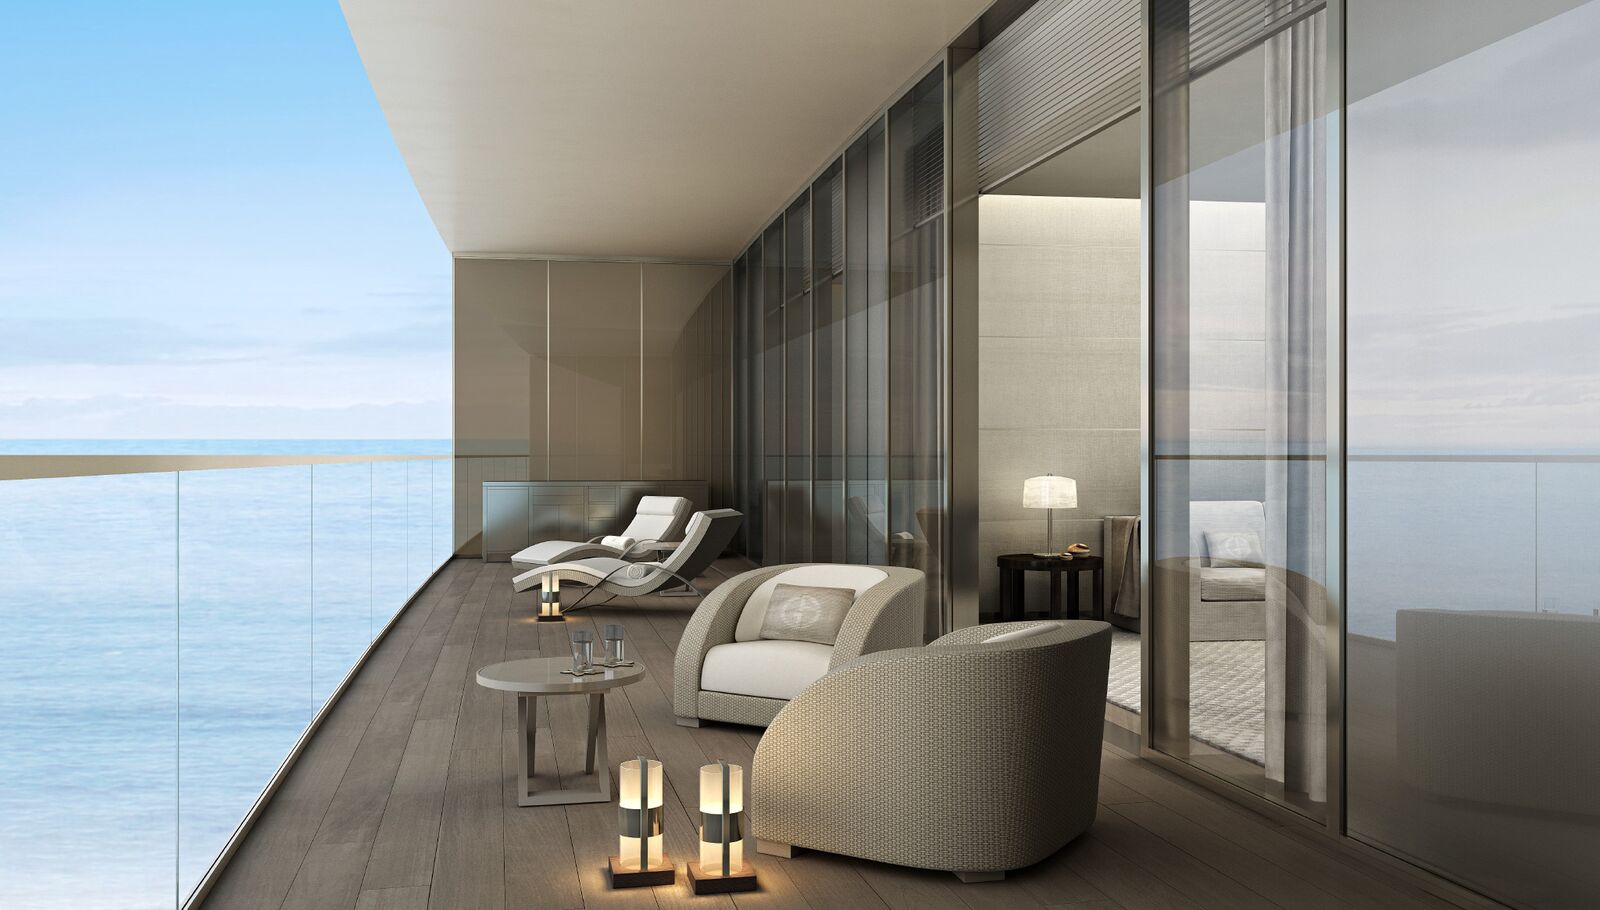 17M HighDesign Penthouse Designed by Armani